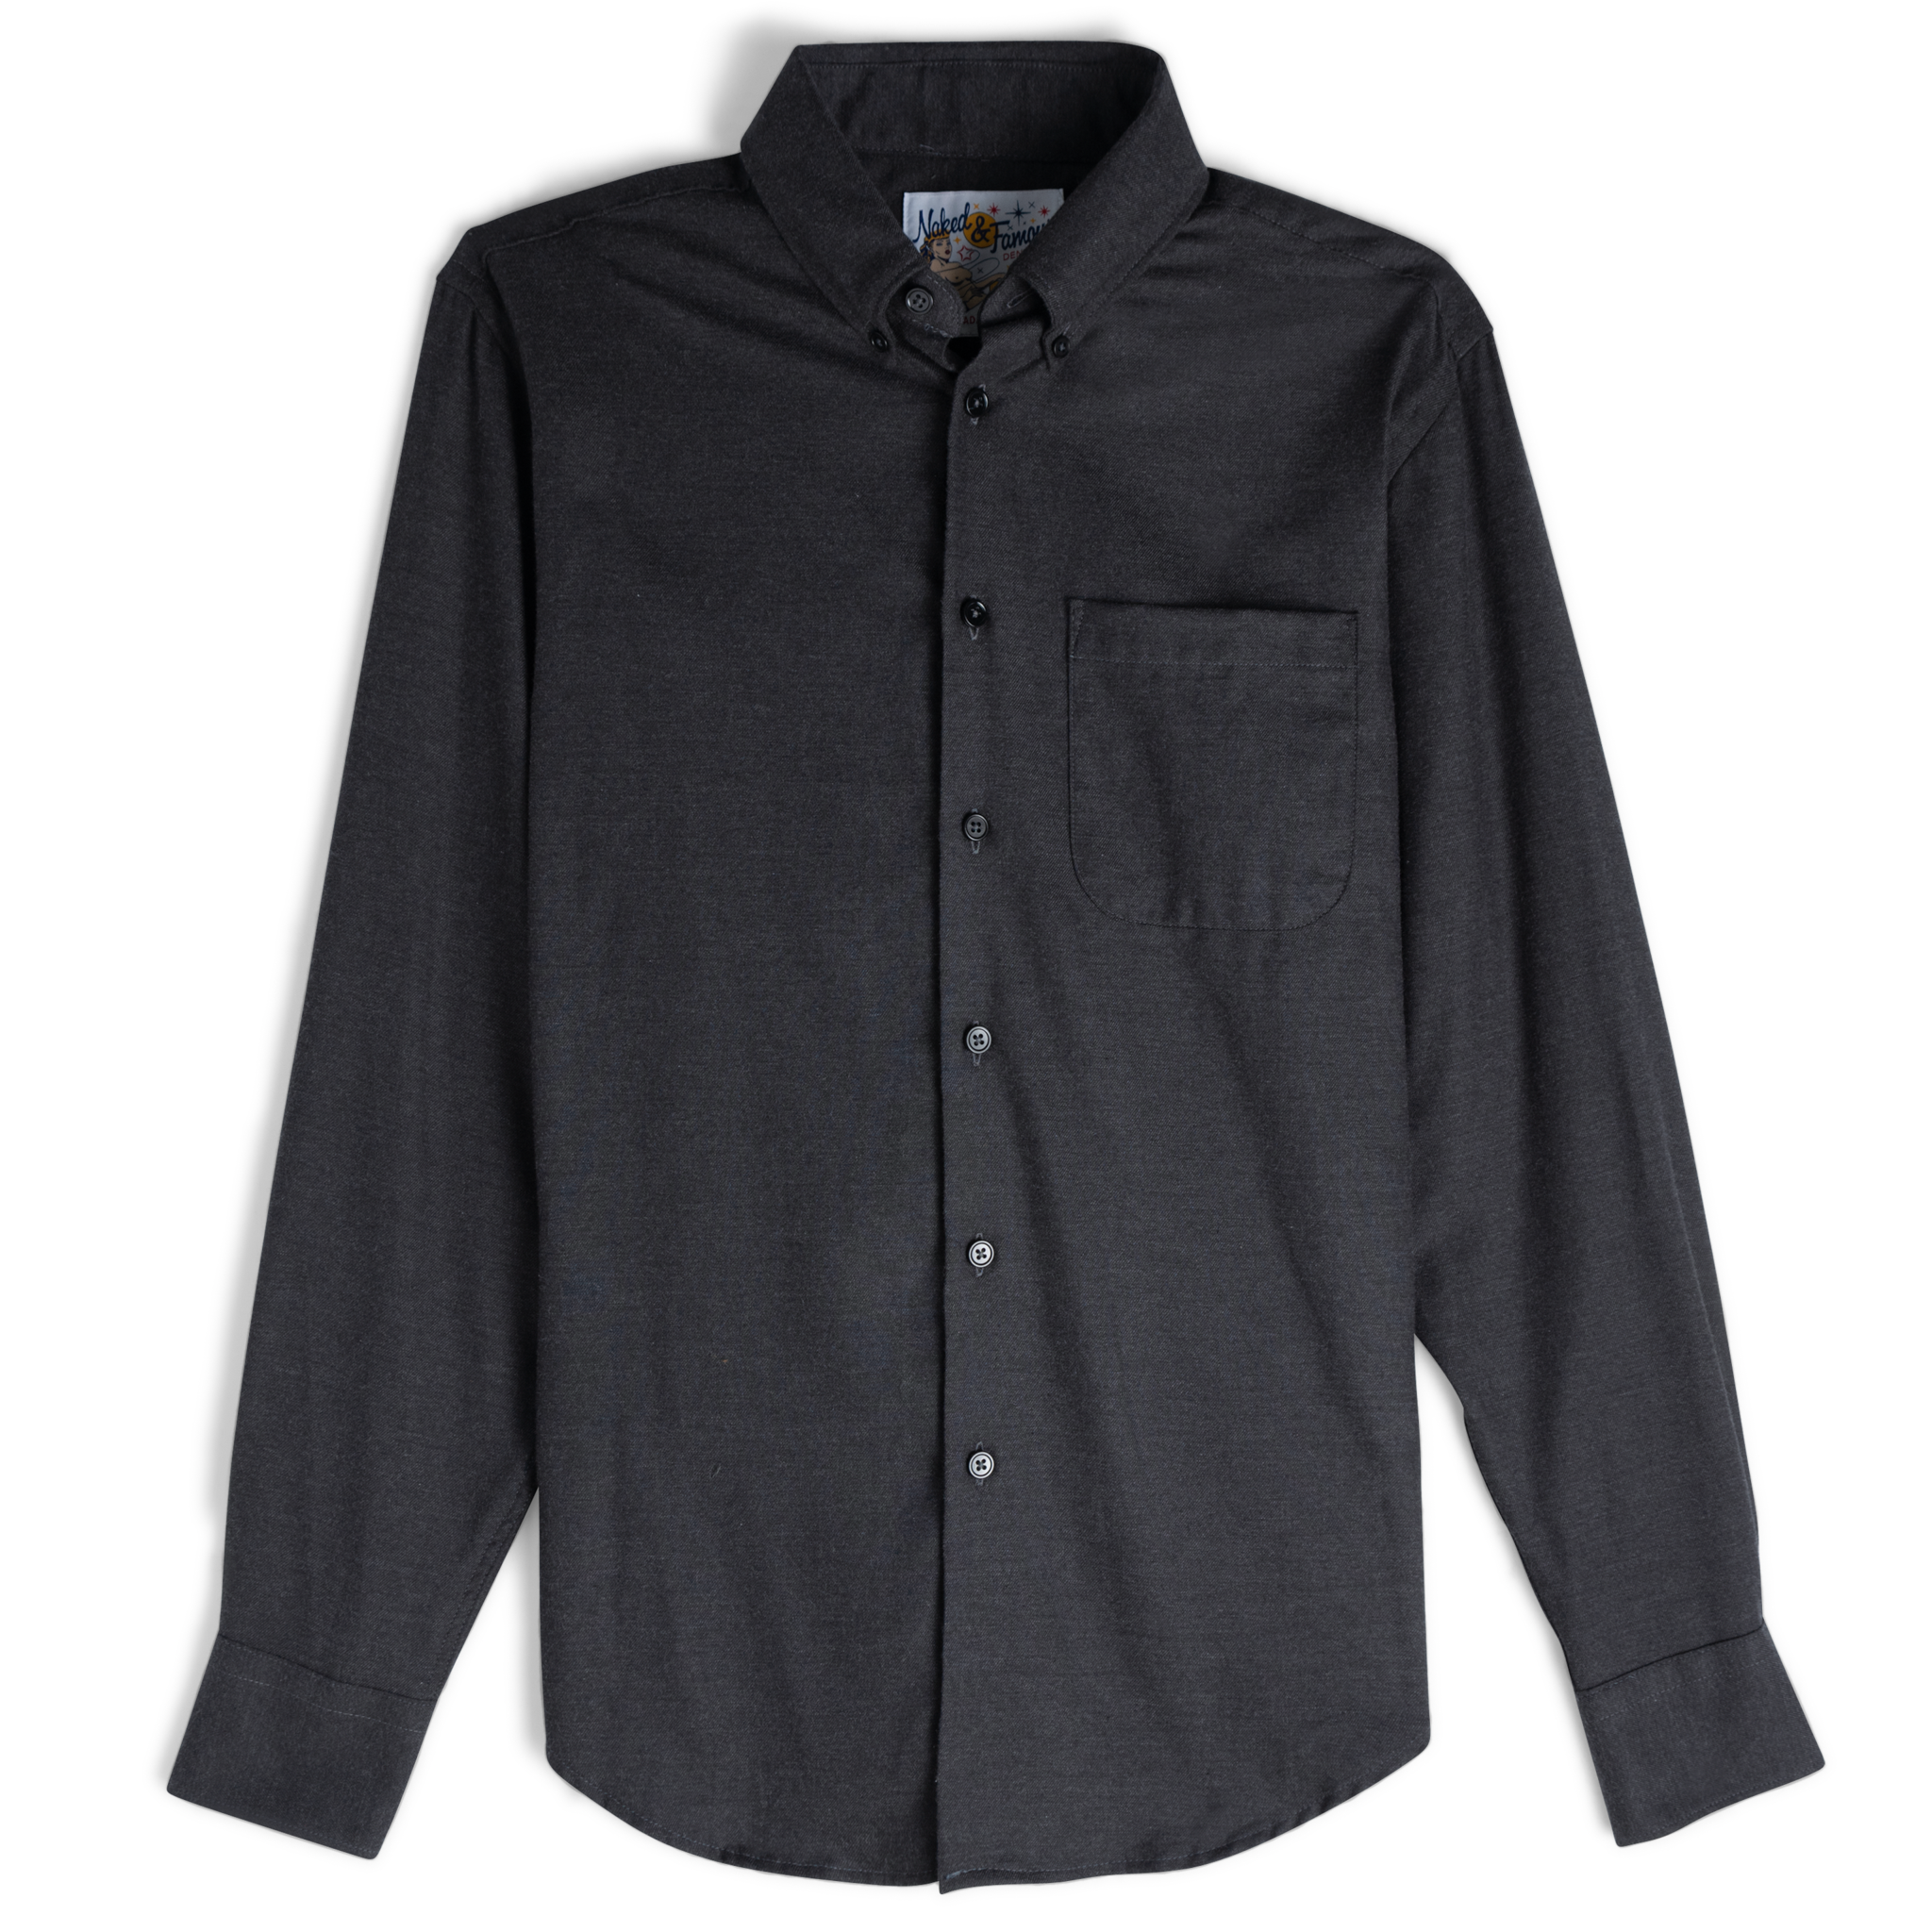  Easy Shirt - Soft Twill - Charcoal - flat front 